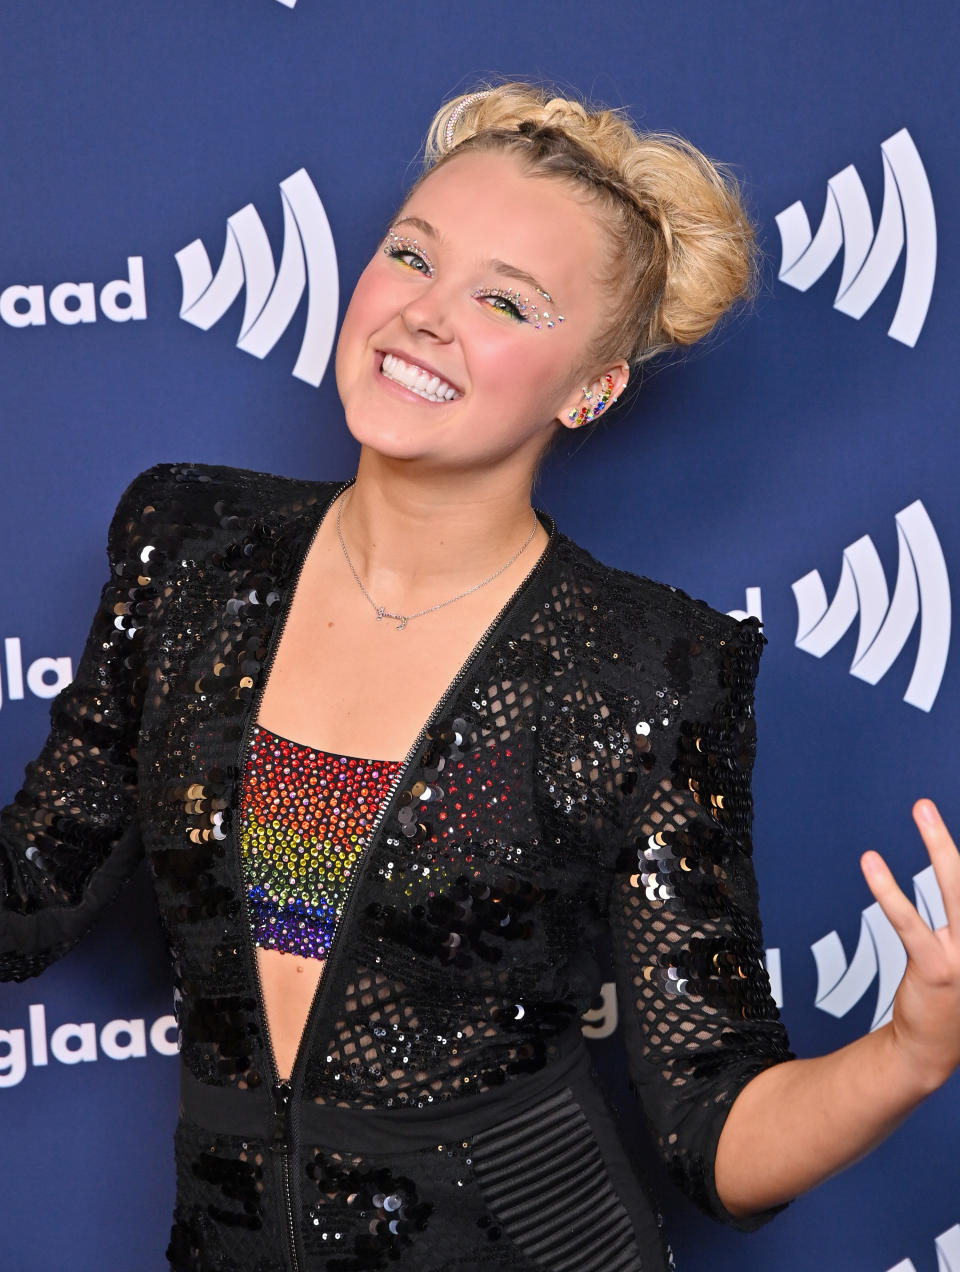   Stefanie Keenan / Getty Images for GLAAD